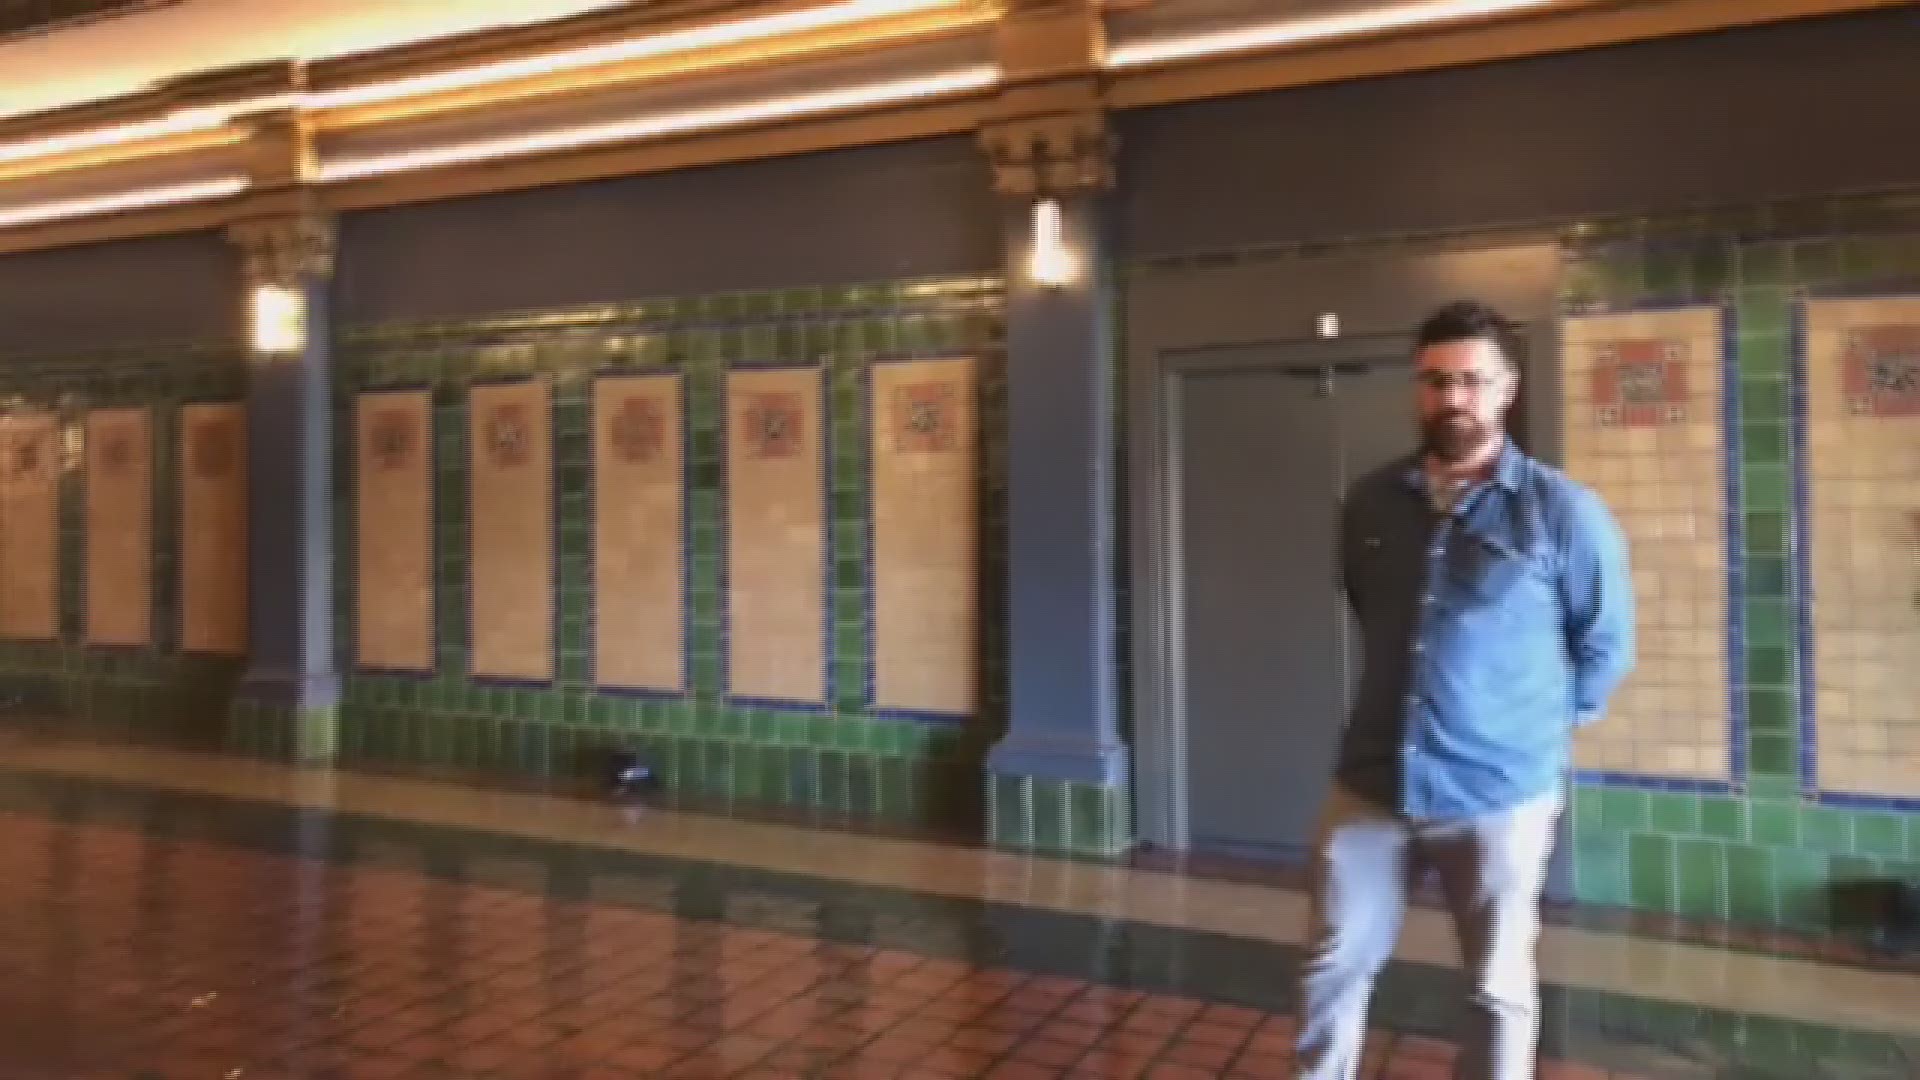 WKYC's Andrew Horansky received a sneak peek of the recently renovated Agora Theatre.